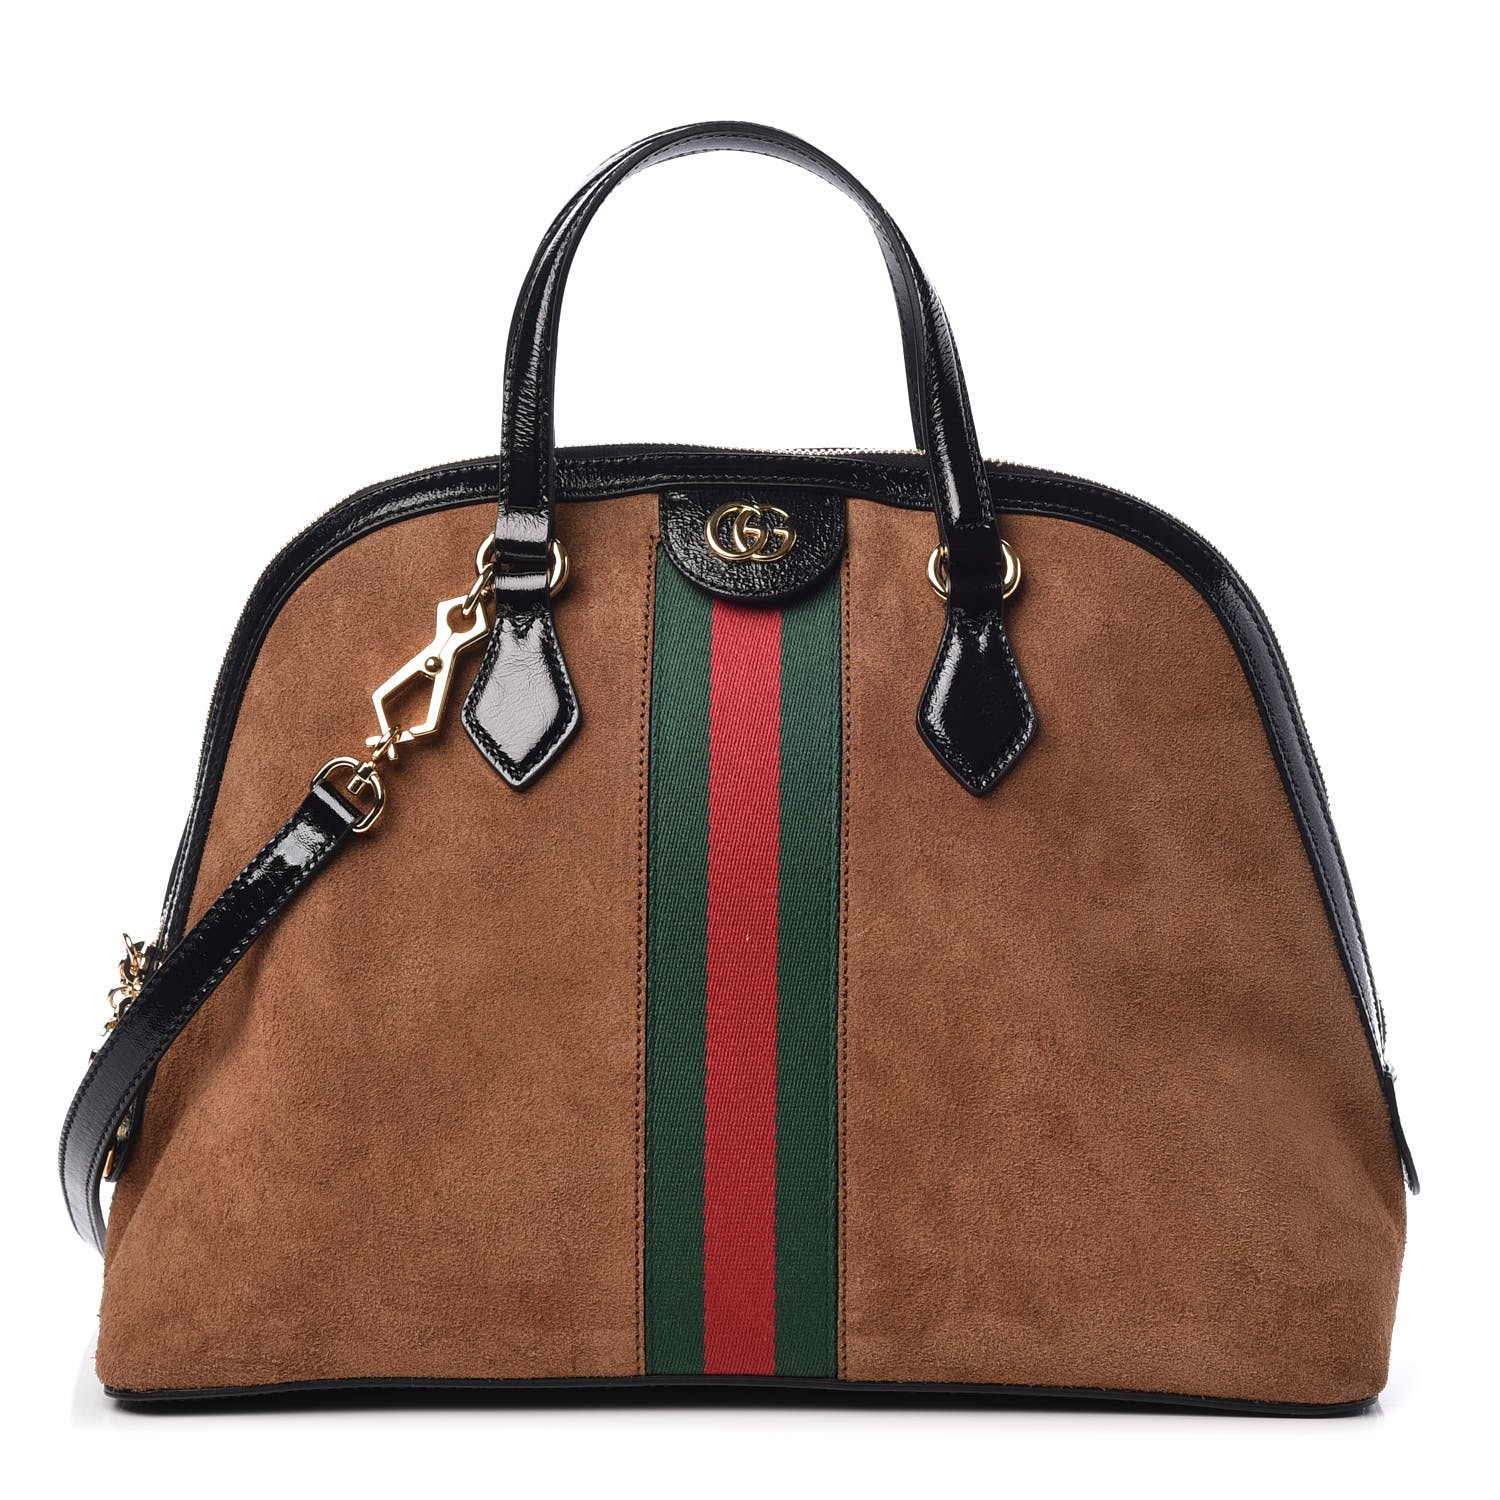 GUCCI Suede Patent GG Web Medium Ophidia Top Handle Bag Brown 318884